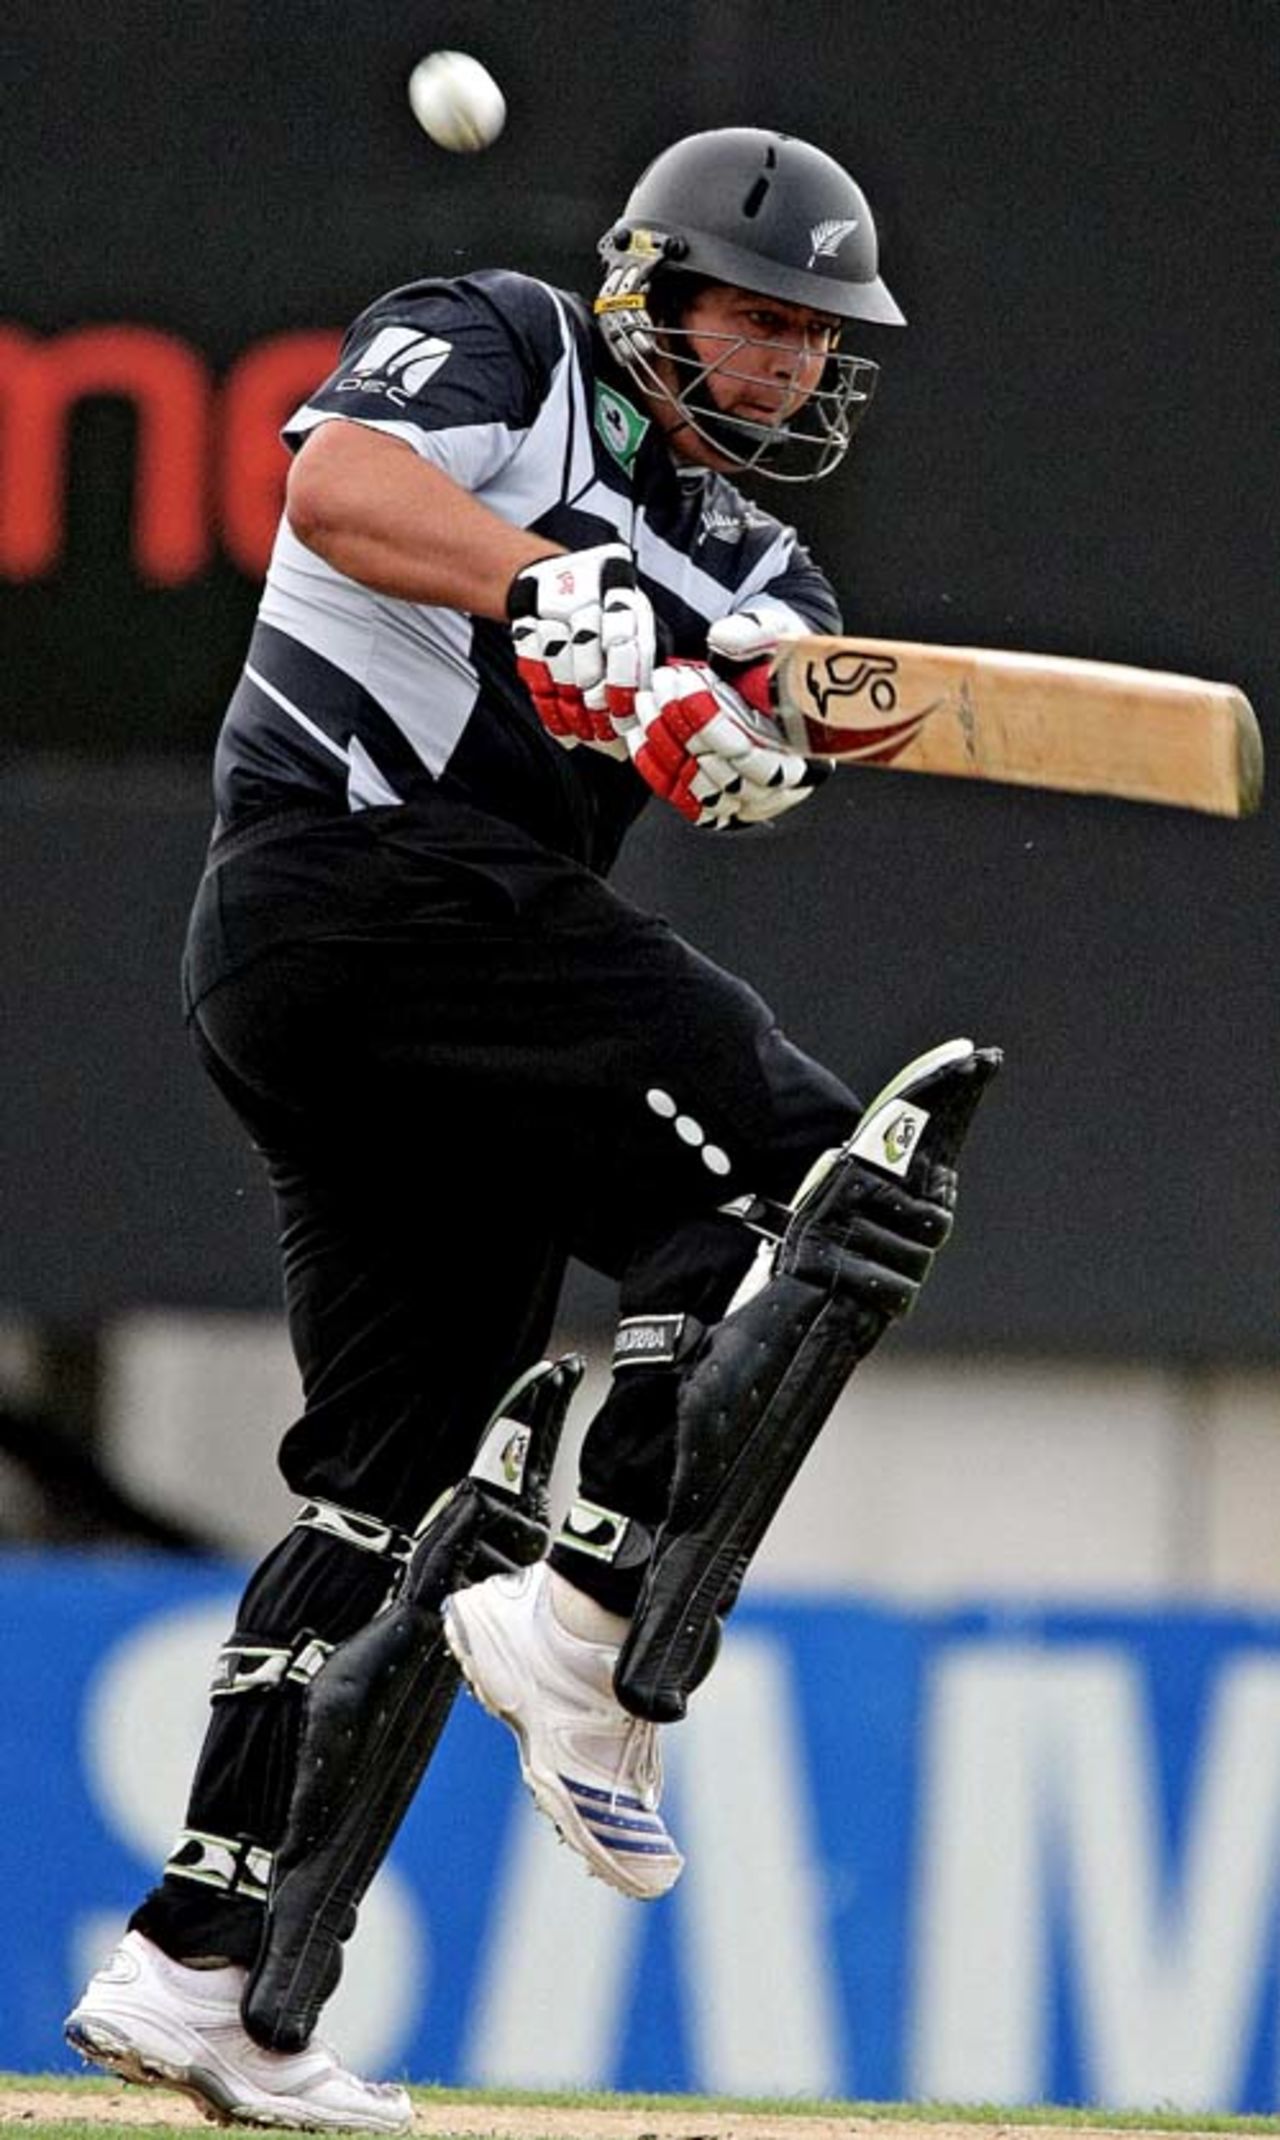 Jesse Ryder attempts to steer one off his hips, New Zealand v West Indies, 2nd ODI, Christchurch, January 3, 2009